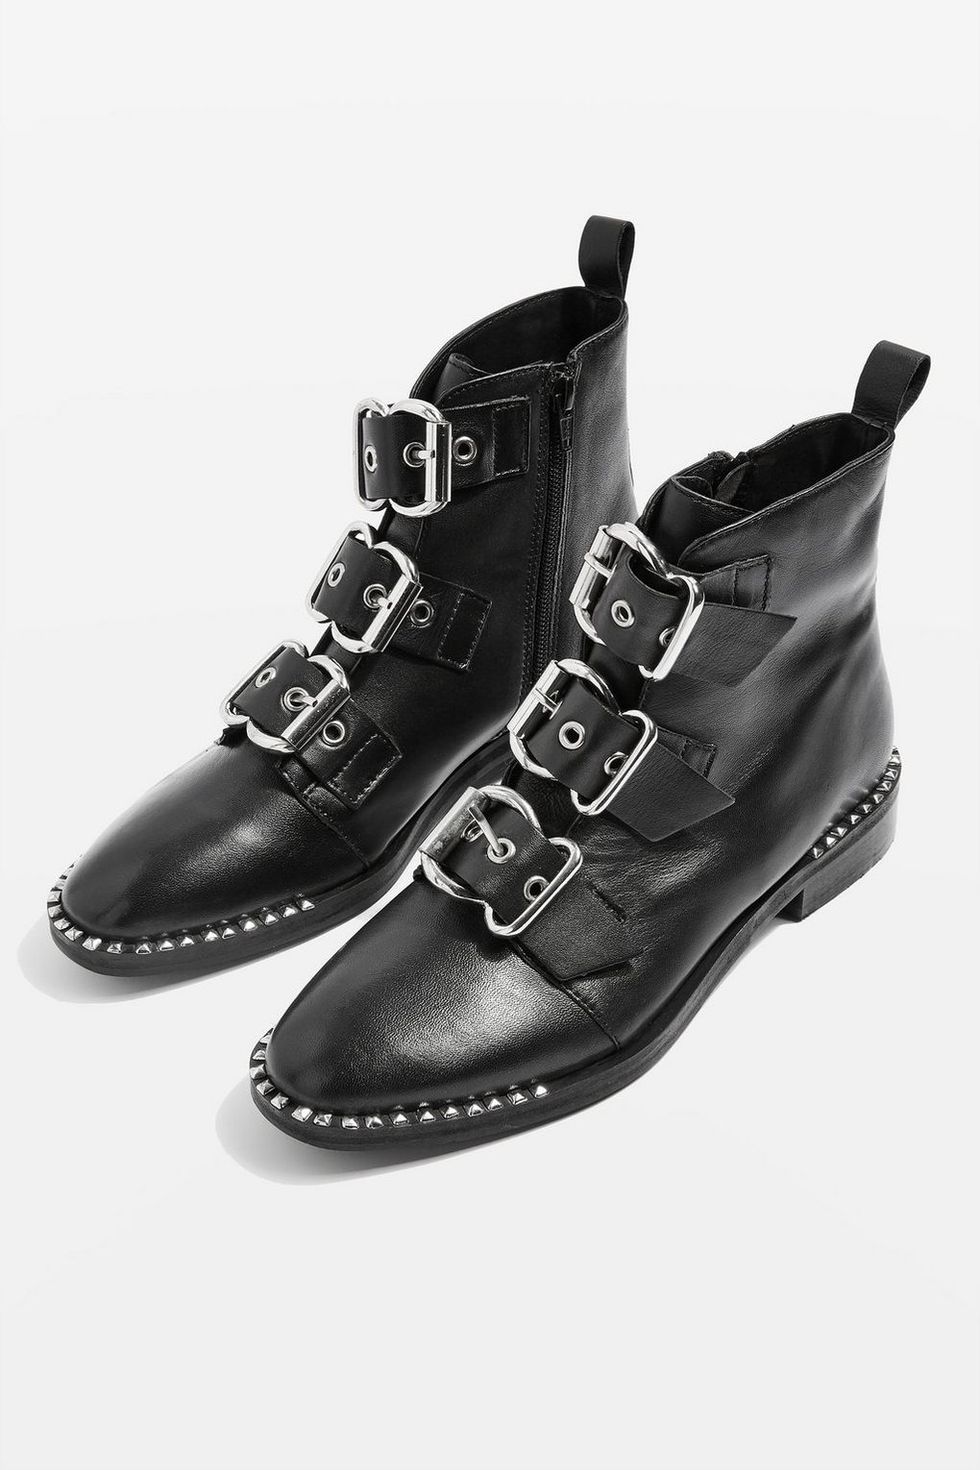 Footwear, Shoe, Black, White, Product, Boot, Buckle, Black-and-white, Leather, Fashion accessory, 